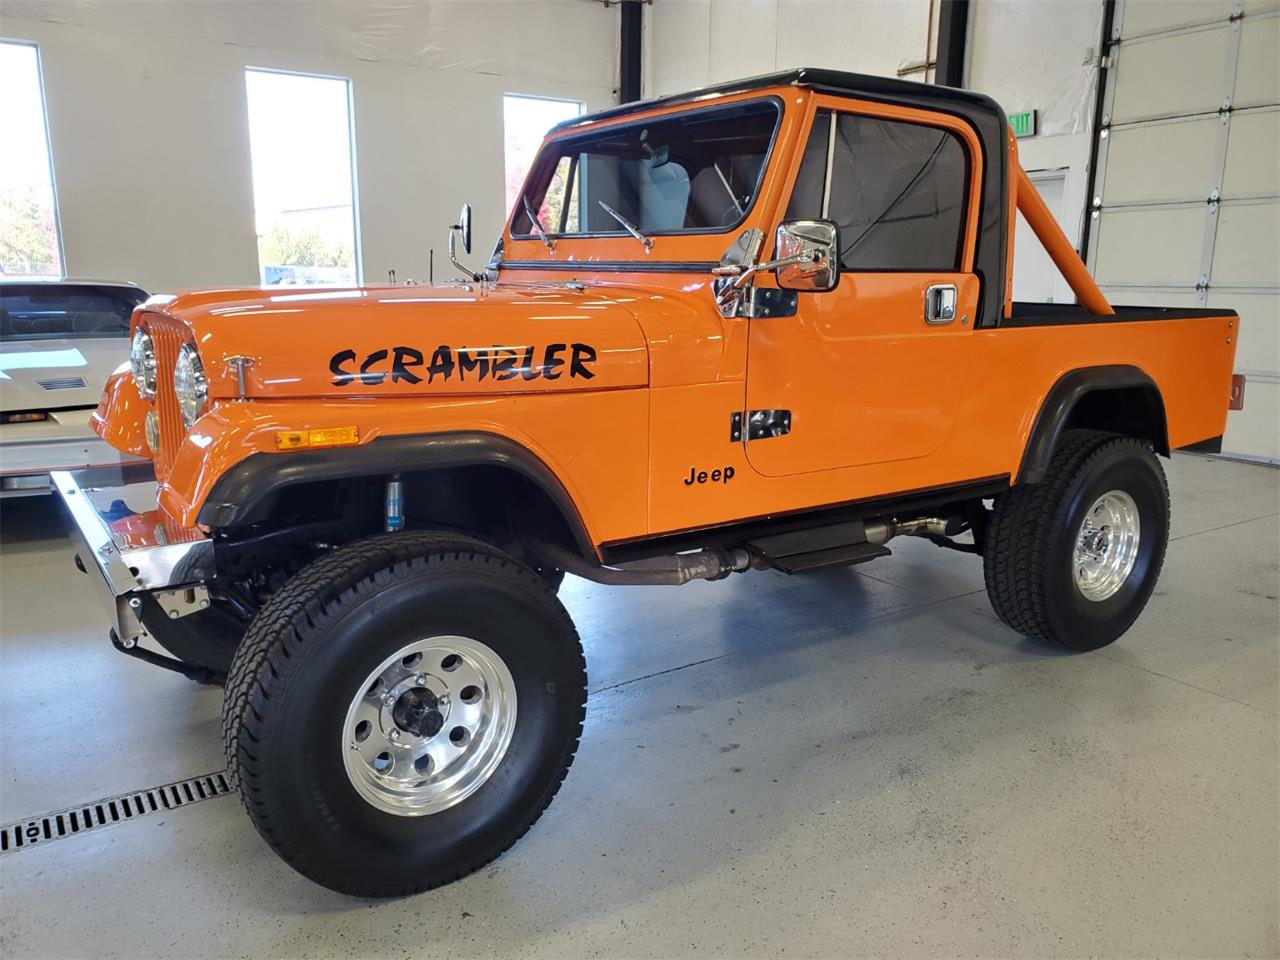 For Sale: 1982 Jeep Scrambler in Bend, Oregon for sale in Bend, OR